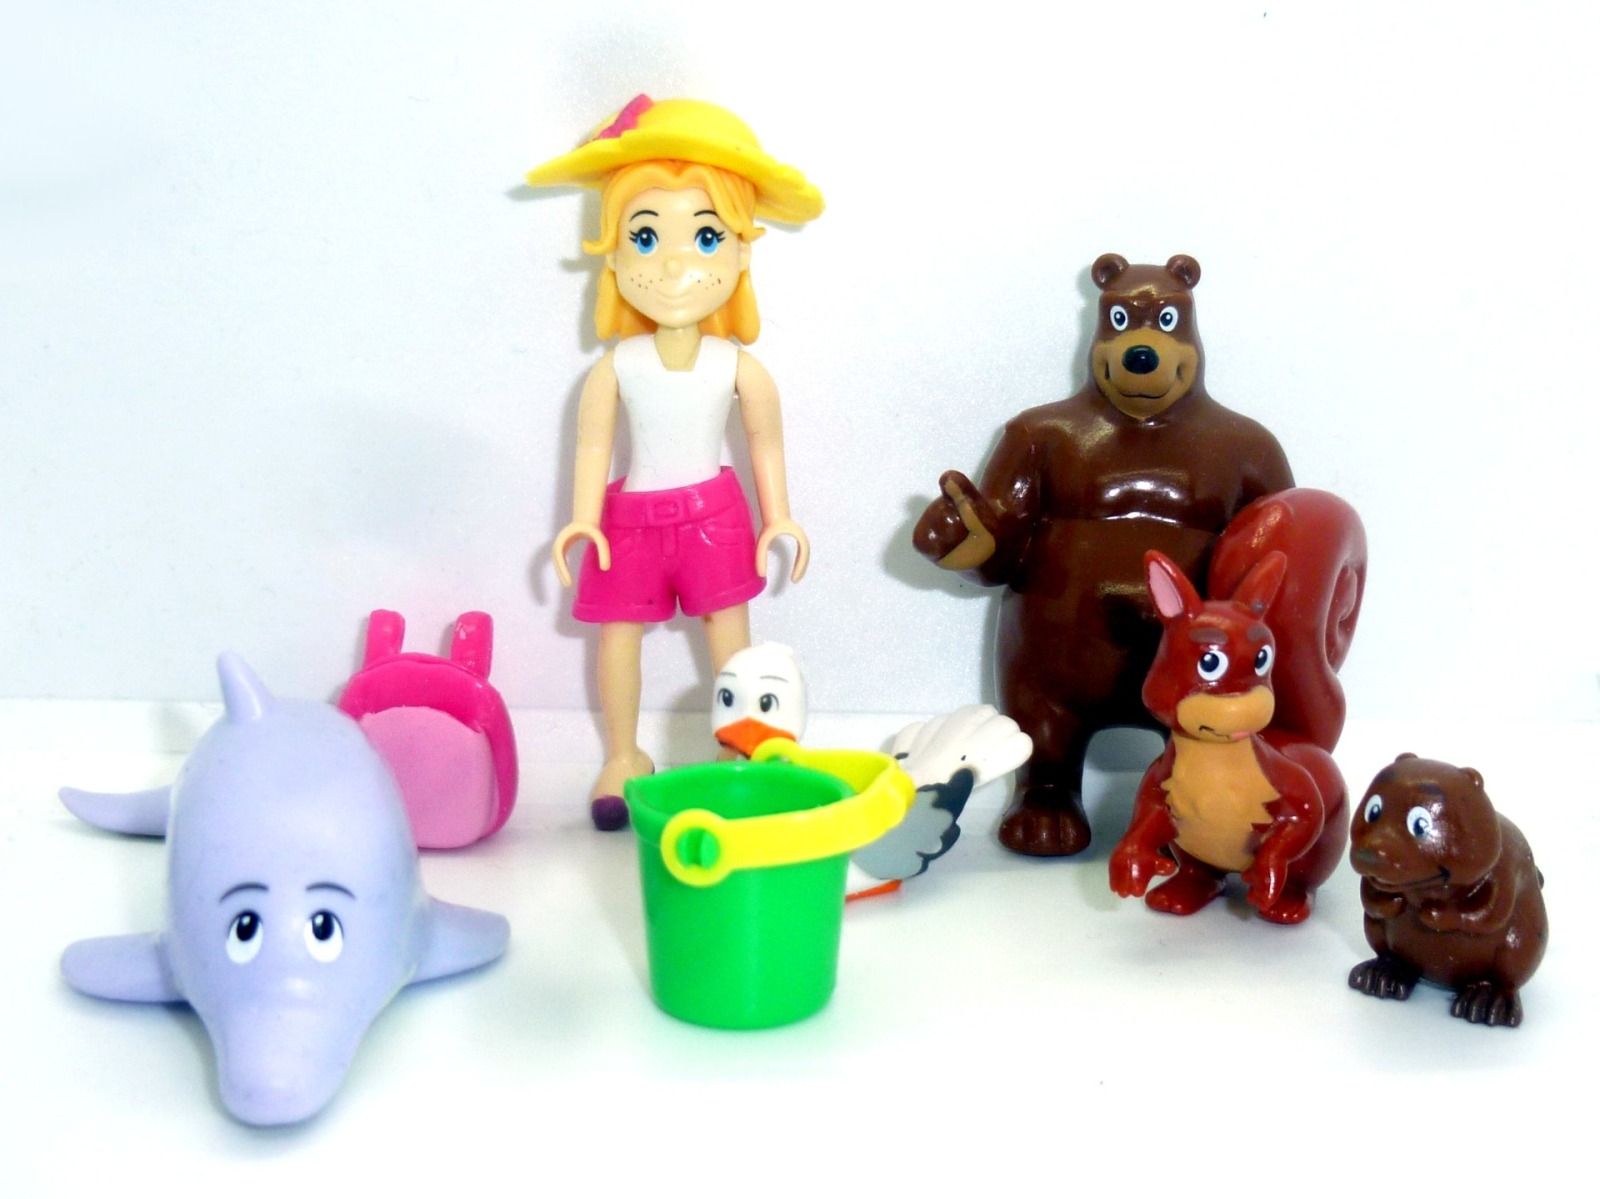 Princess Coralie and her friends - figures